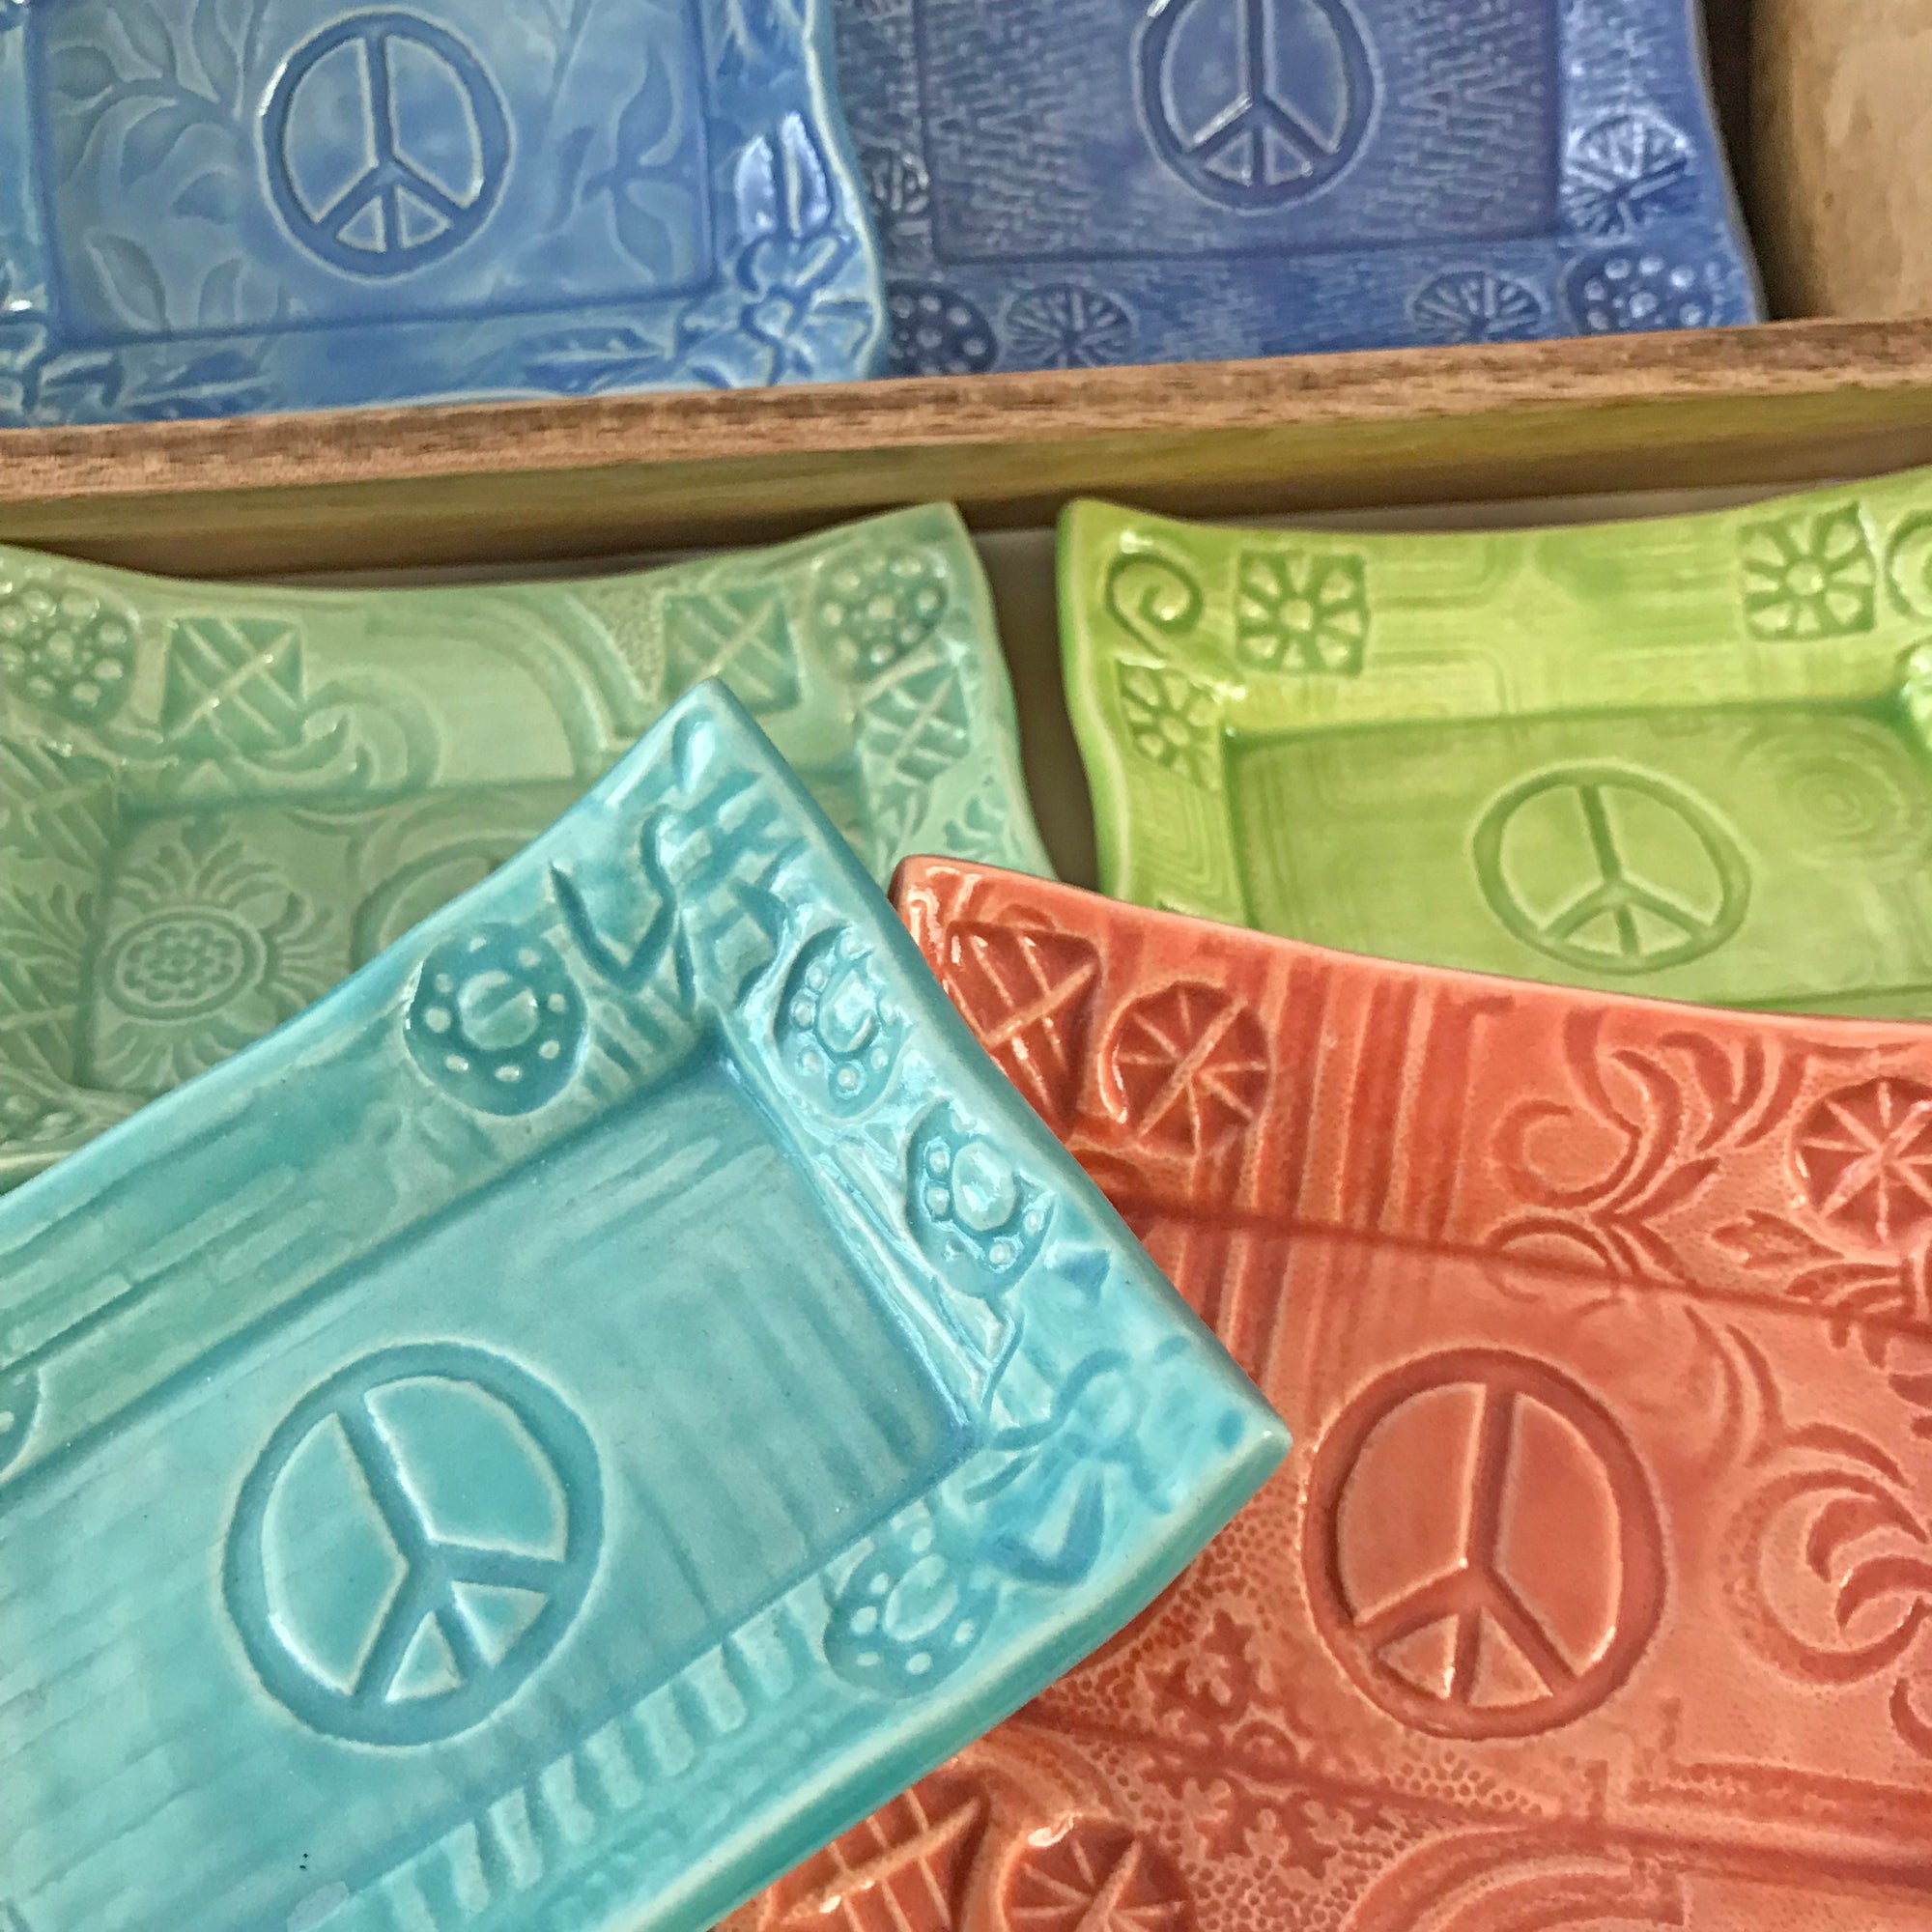 Soap Dish with peace sign.  Handmade and each is different.  A great gift idea.